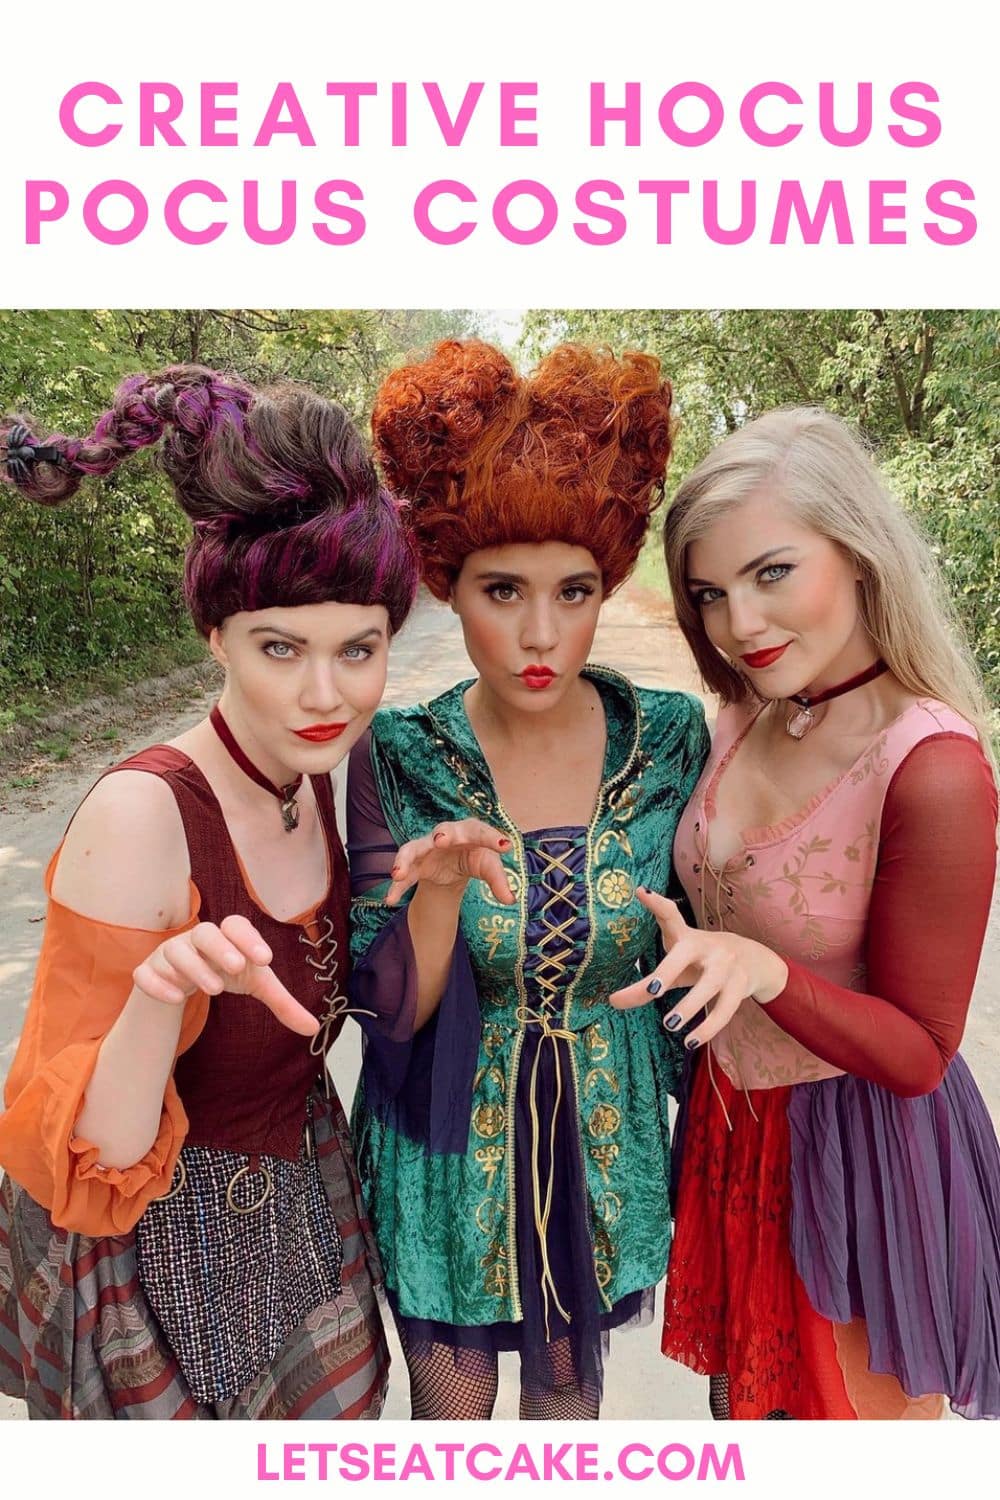 How to Make the Perfect Hocus Pocus Costume for Halloween - Let's Eat Cake